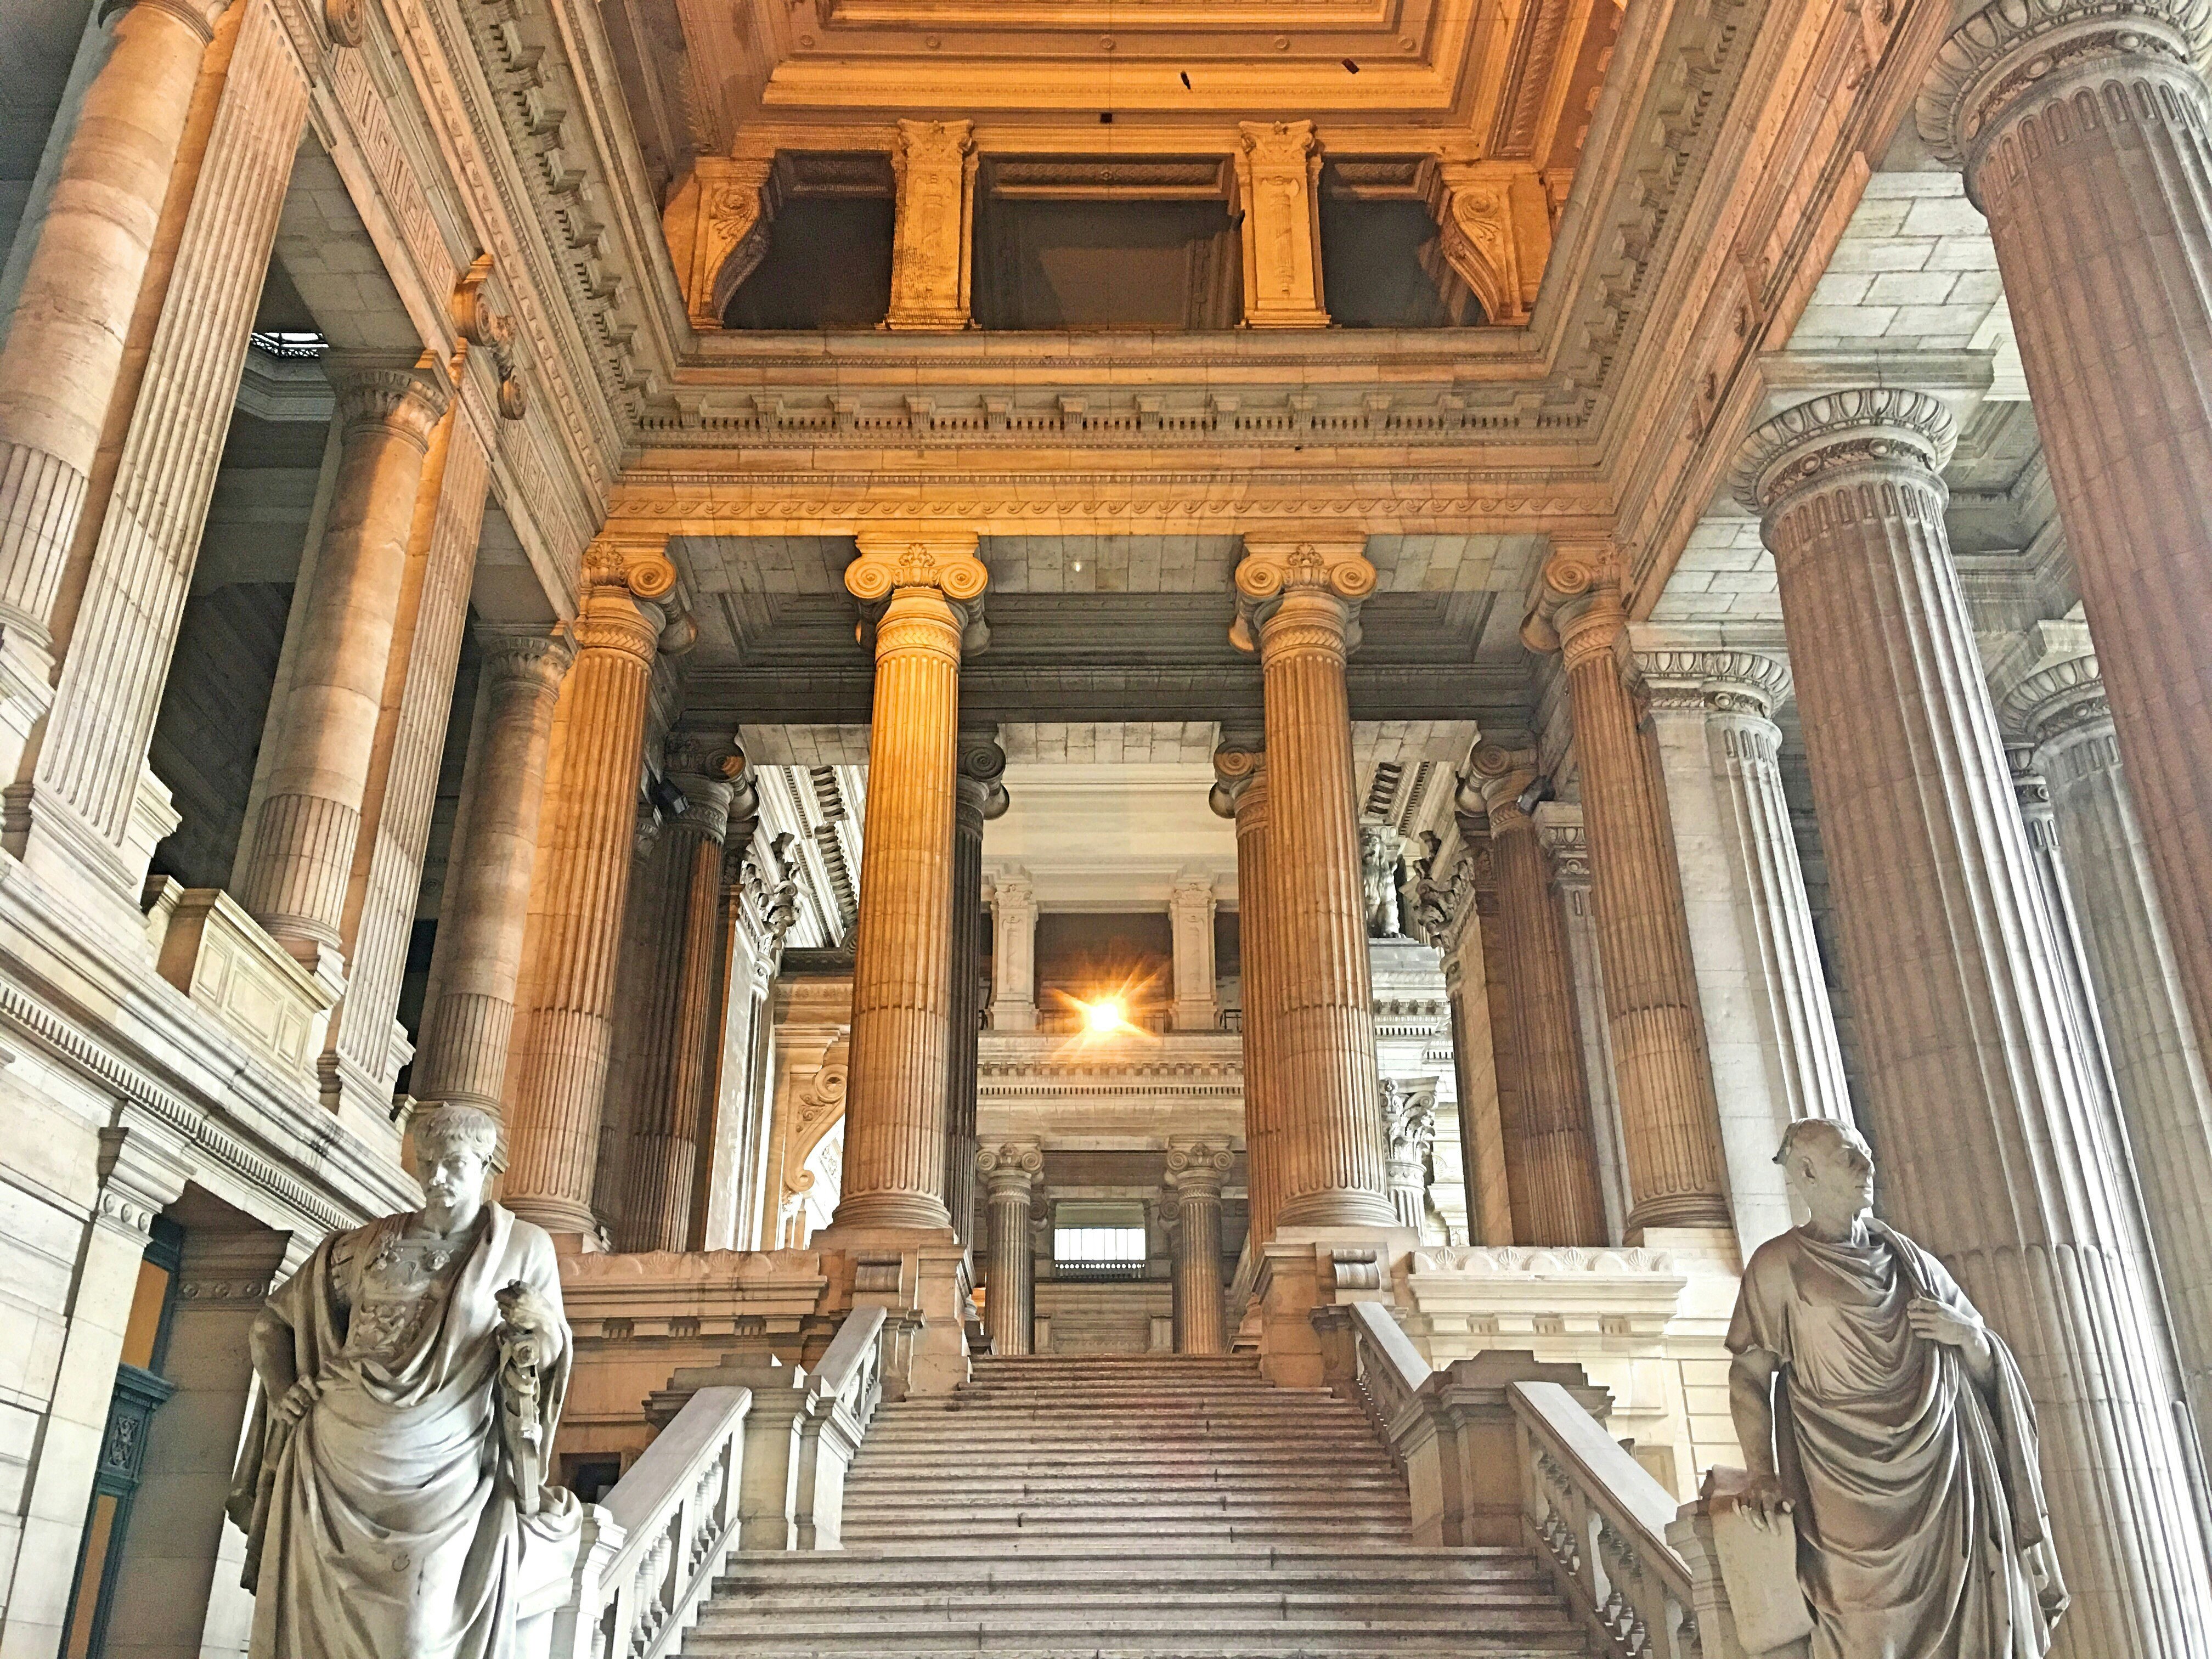 Stone steps flanked by statues leading up to the grand, galleried and colonnaded Palais de Justice interior.